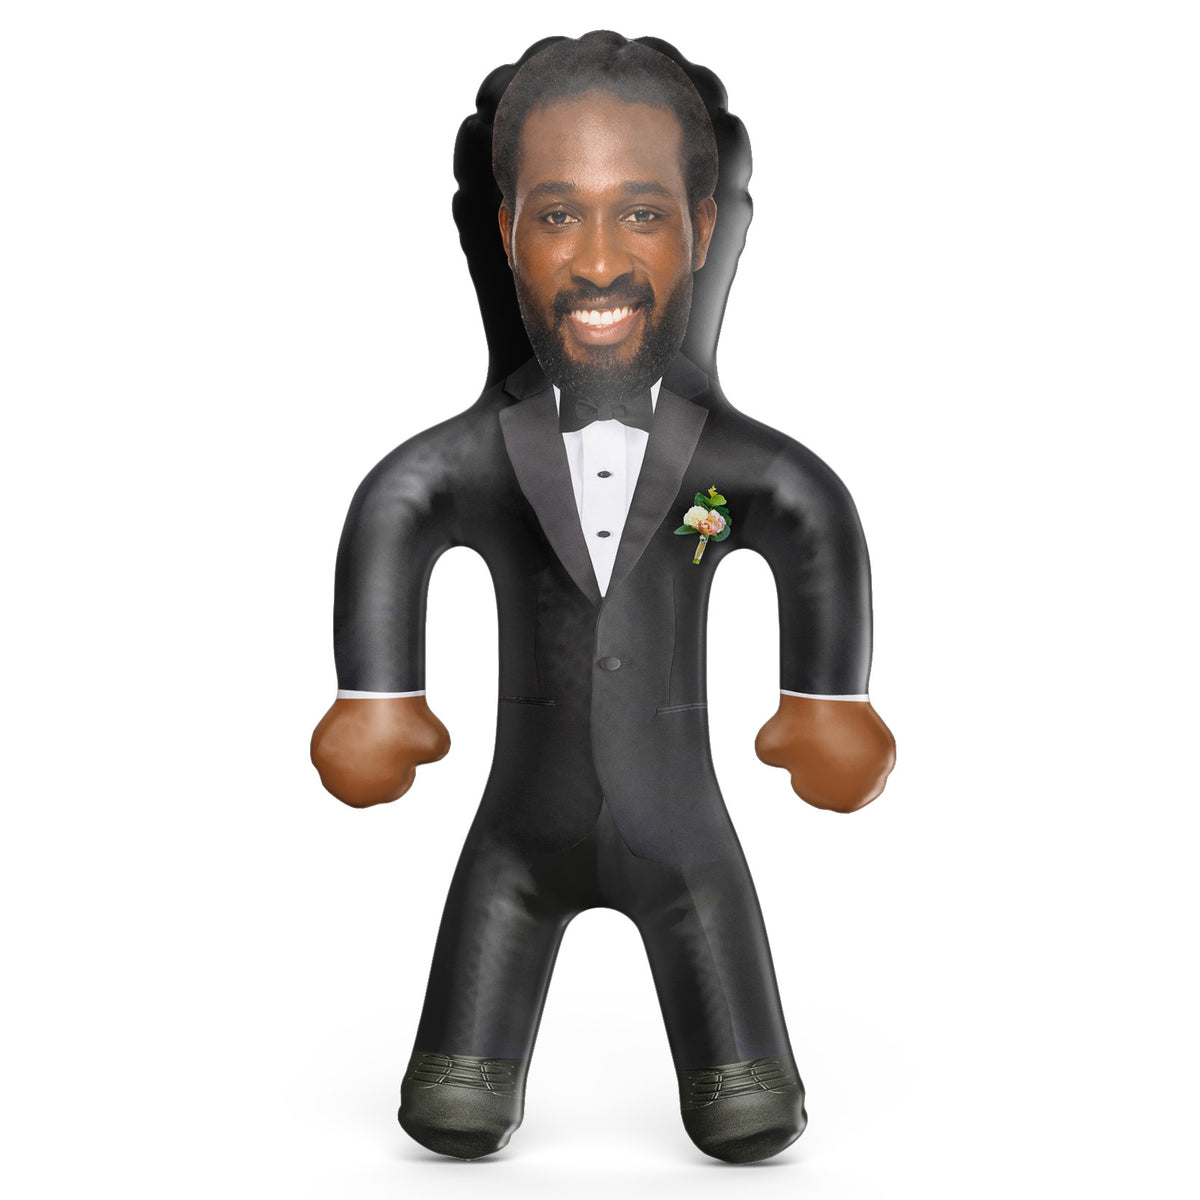 Groom Inflatable Doll